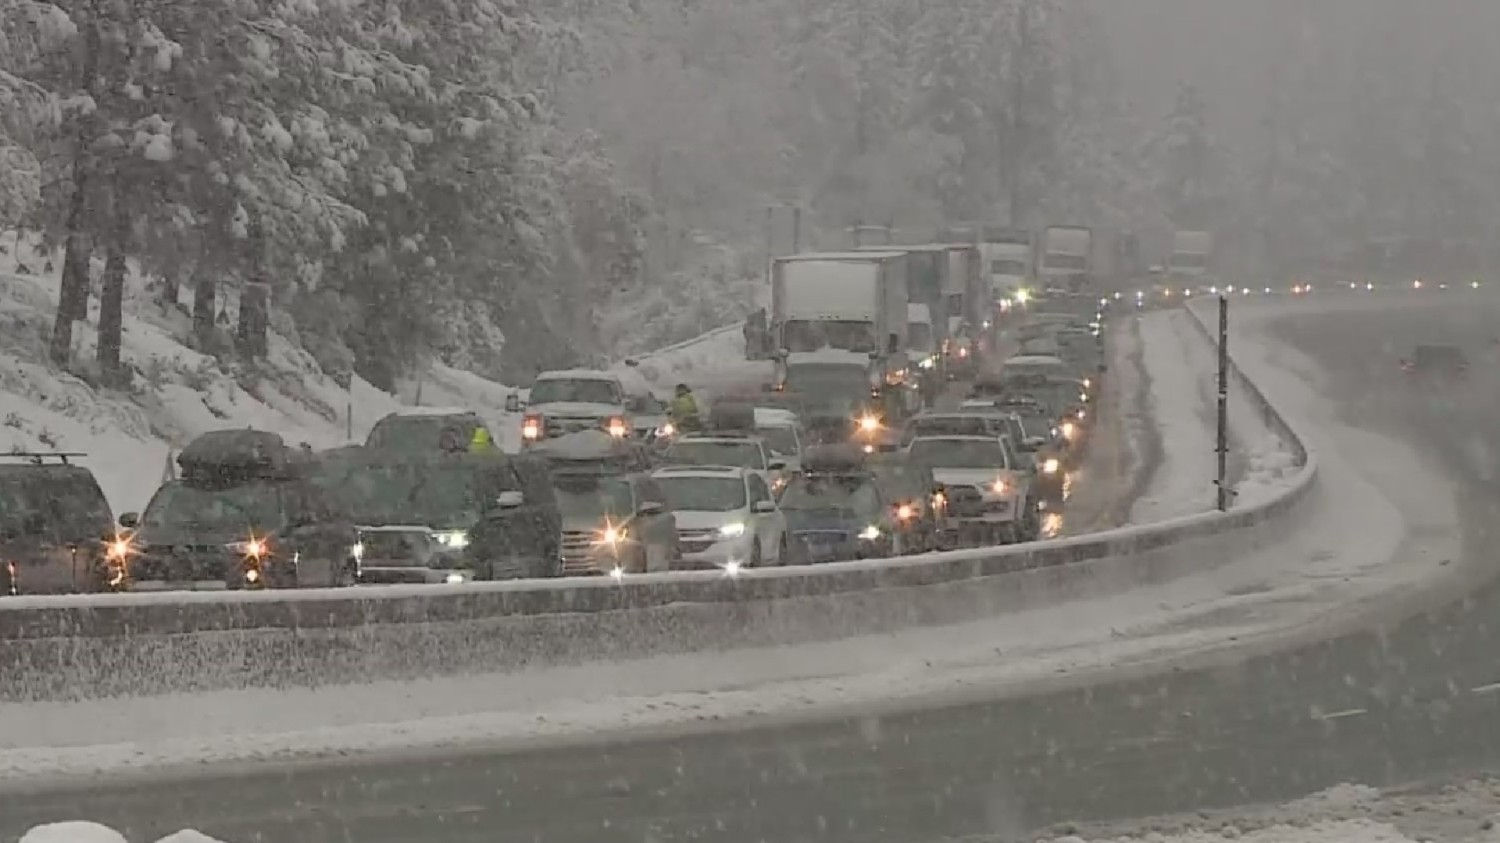 Caltrans Discourages Non-Essential Travel To Sierra Until Conditions Improve